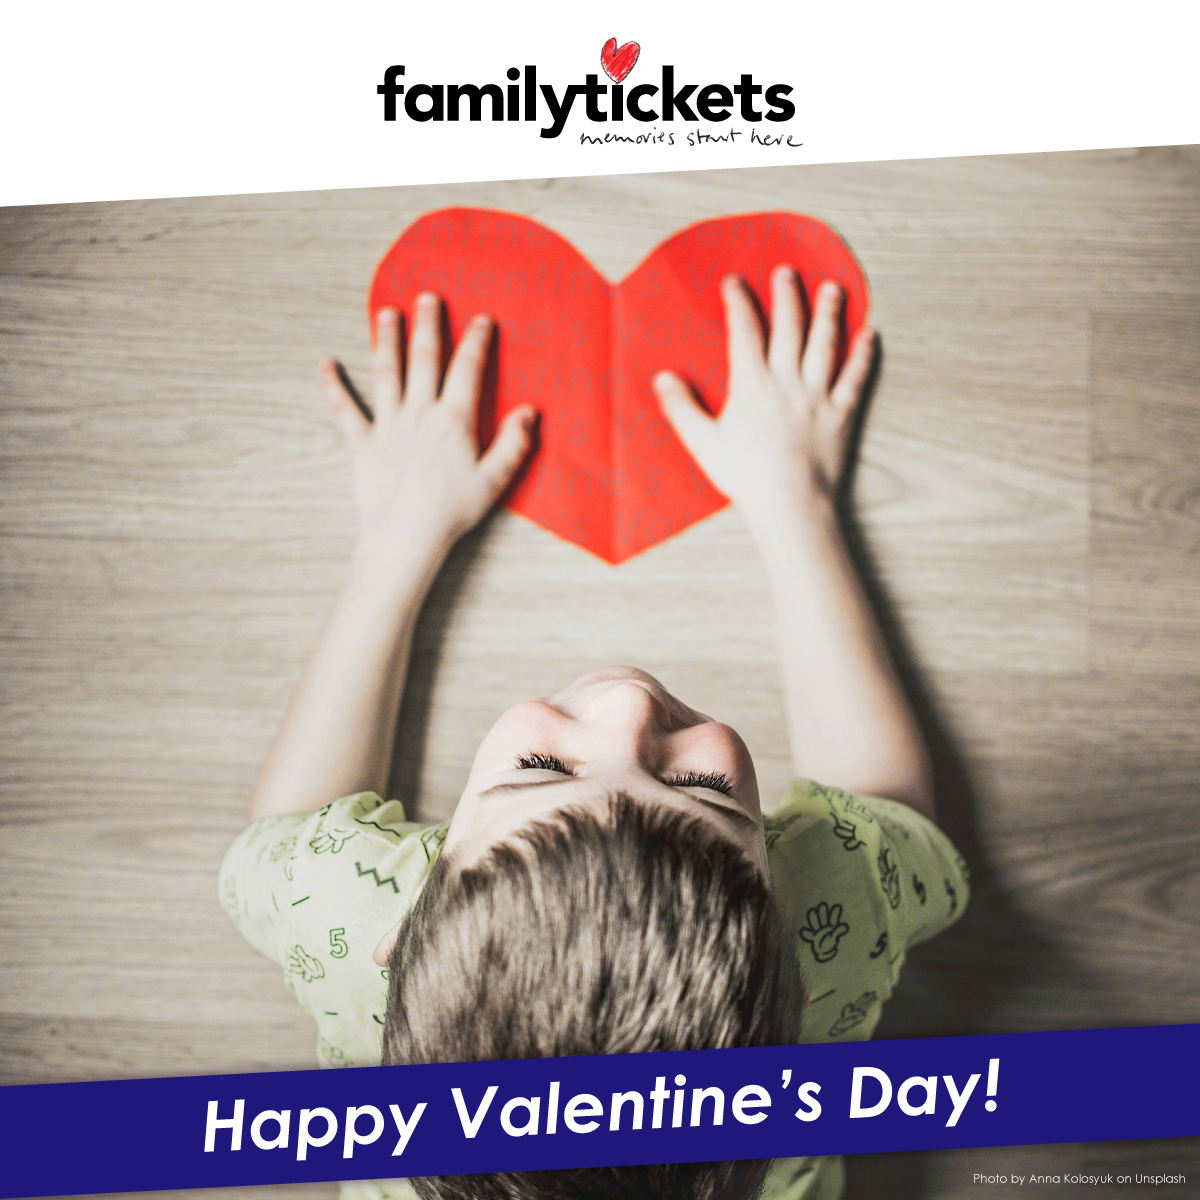 💕 Happy Valentine’s Day to your family from us here at Family Tickets!

Please take a look at our website
👉 familytickets.com 👈
for a magical day out the whole family will love looking forward to.

Memories Start Here #WithFamilyTickets❤️

#FamilyDayOut #KidsDayOut